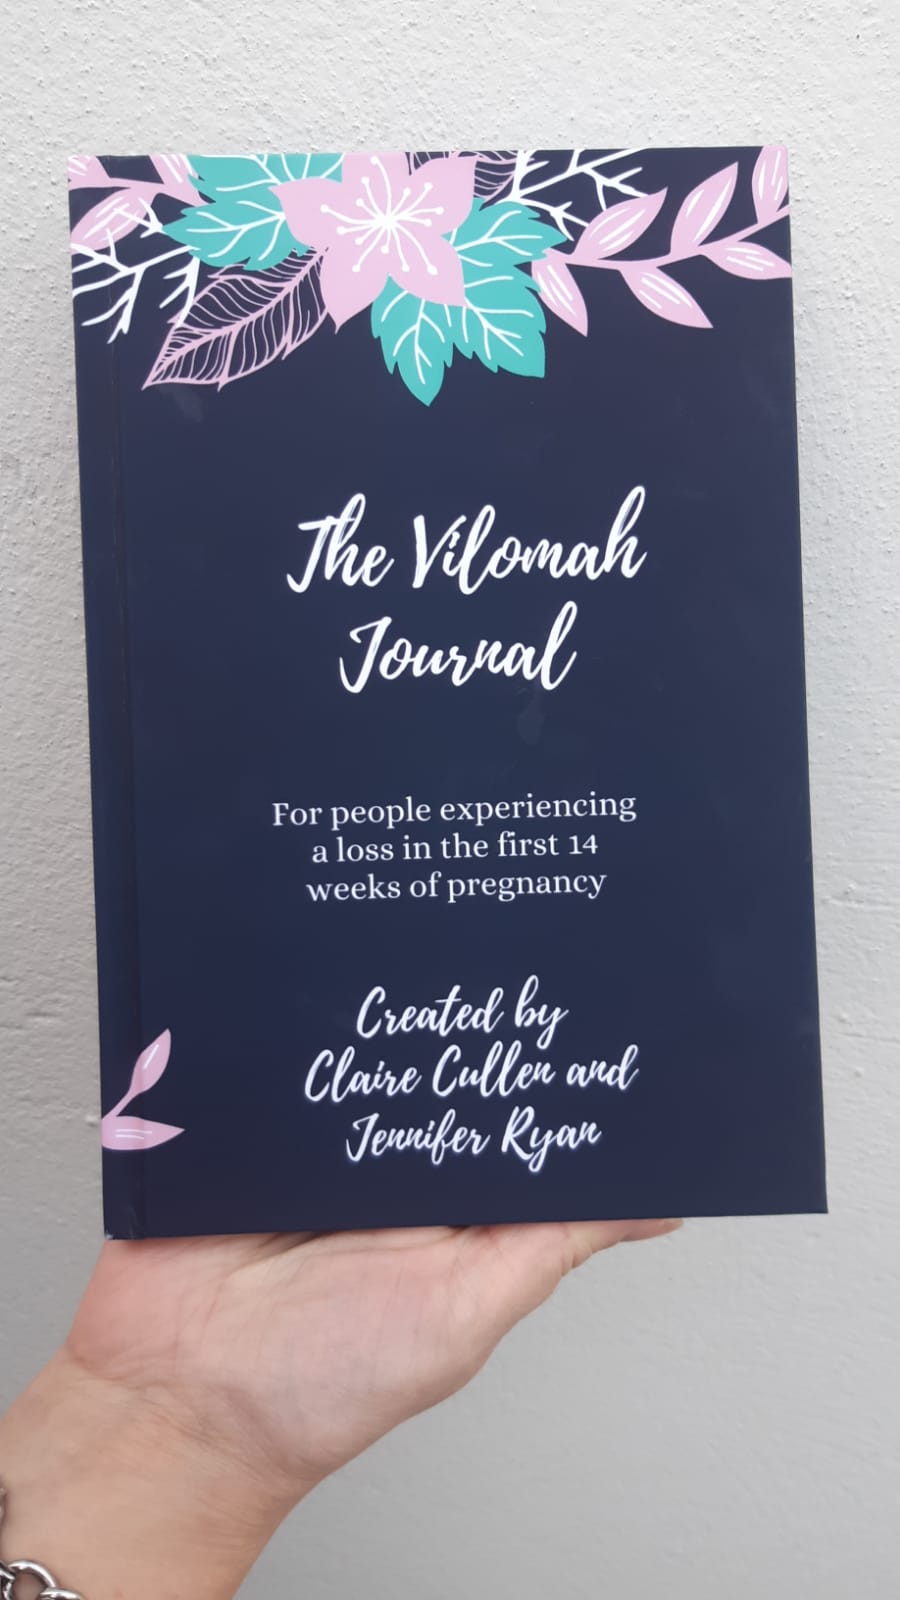 The Vilomah Pregnancy Loss Journal: For people experiencing a loss in pregnancy up to 14 weeks